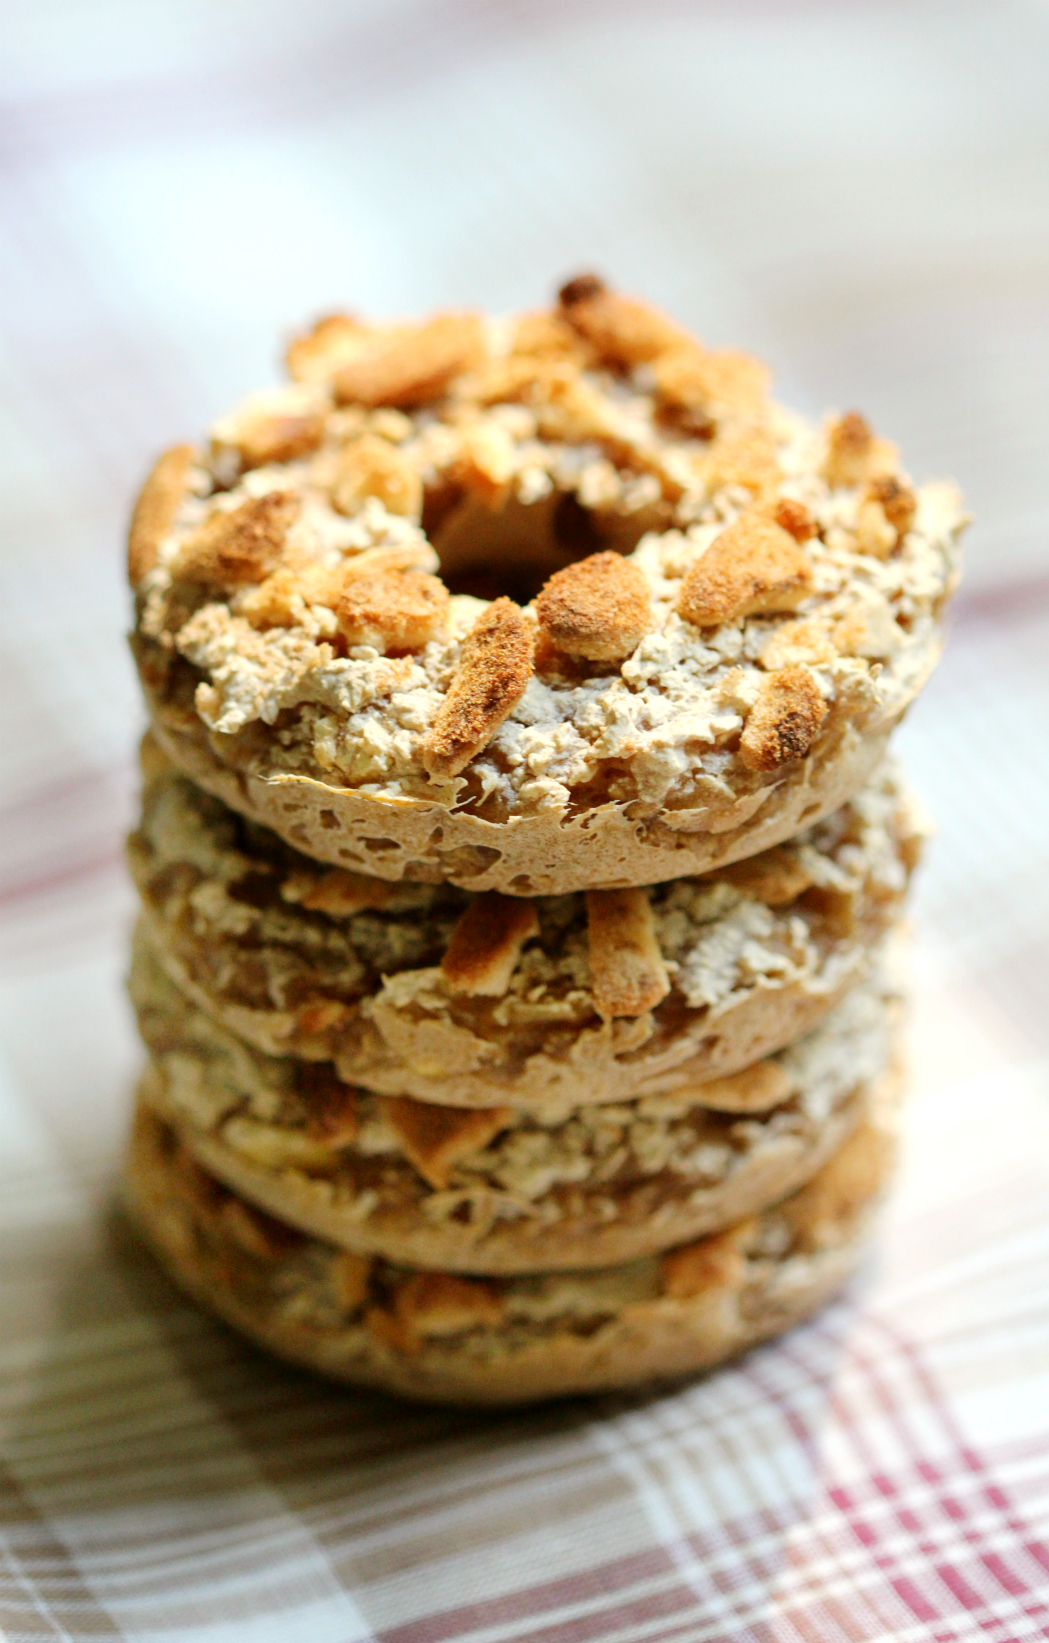 Apple Cinnamon Crumble Doughnuts | Strength and Sunshine @RebeccaGF666 All the seasonal flavors of an apple crumble in the form of an easy allergy-friendly baked doughnut! These apple cinnamon crumble doughnuts allow you to take your crumble on the go without the need for a fork or spoon! A healthy gluten-free, nut-free, vegan, and paleo breakfast or dessert recipe! 